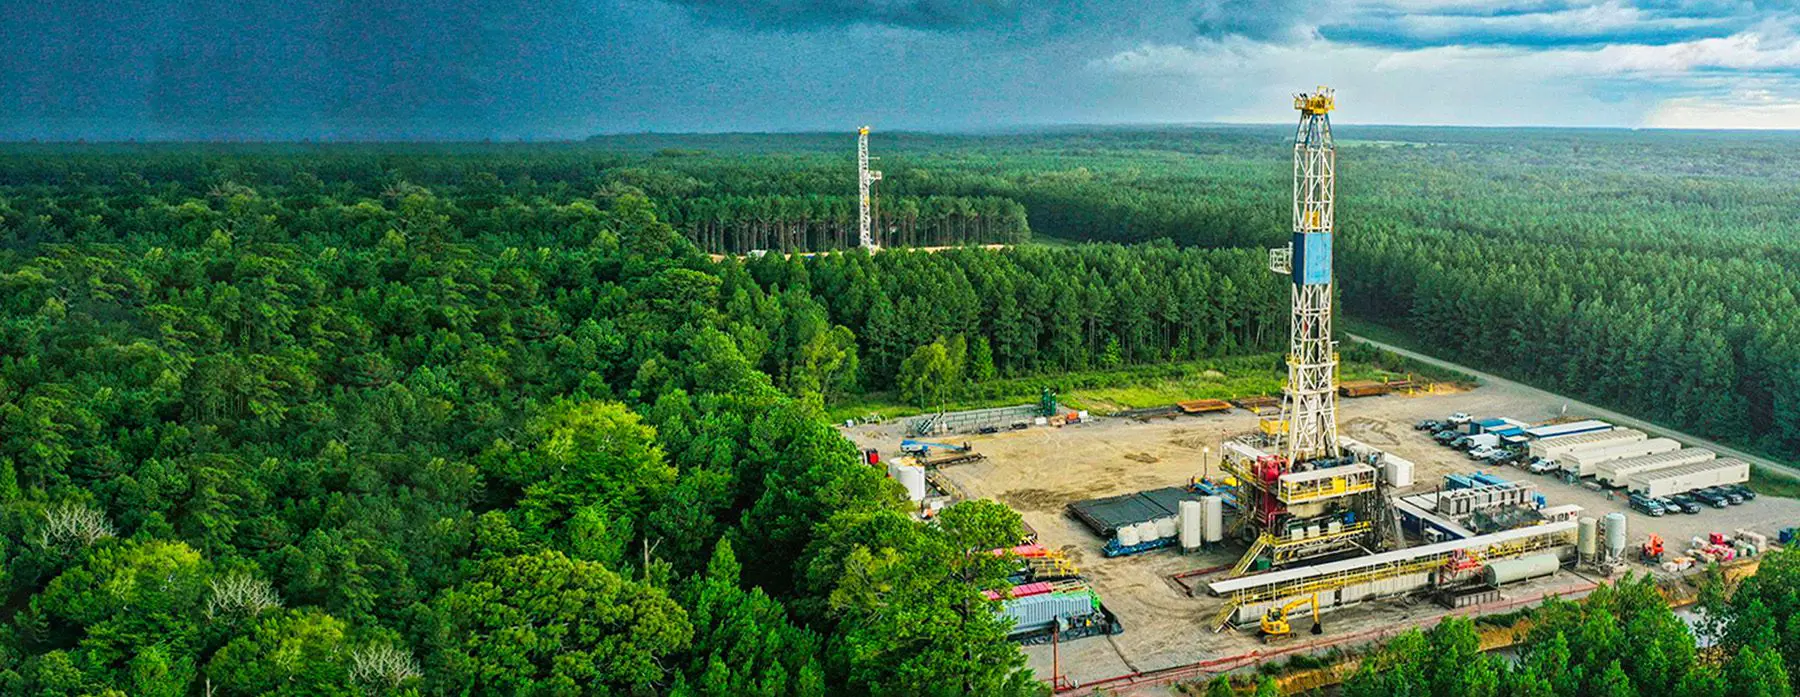 aerial image of a drilling rig in East Texas